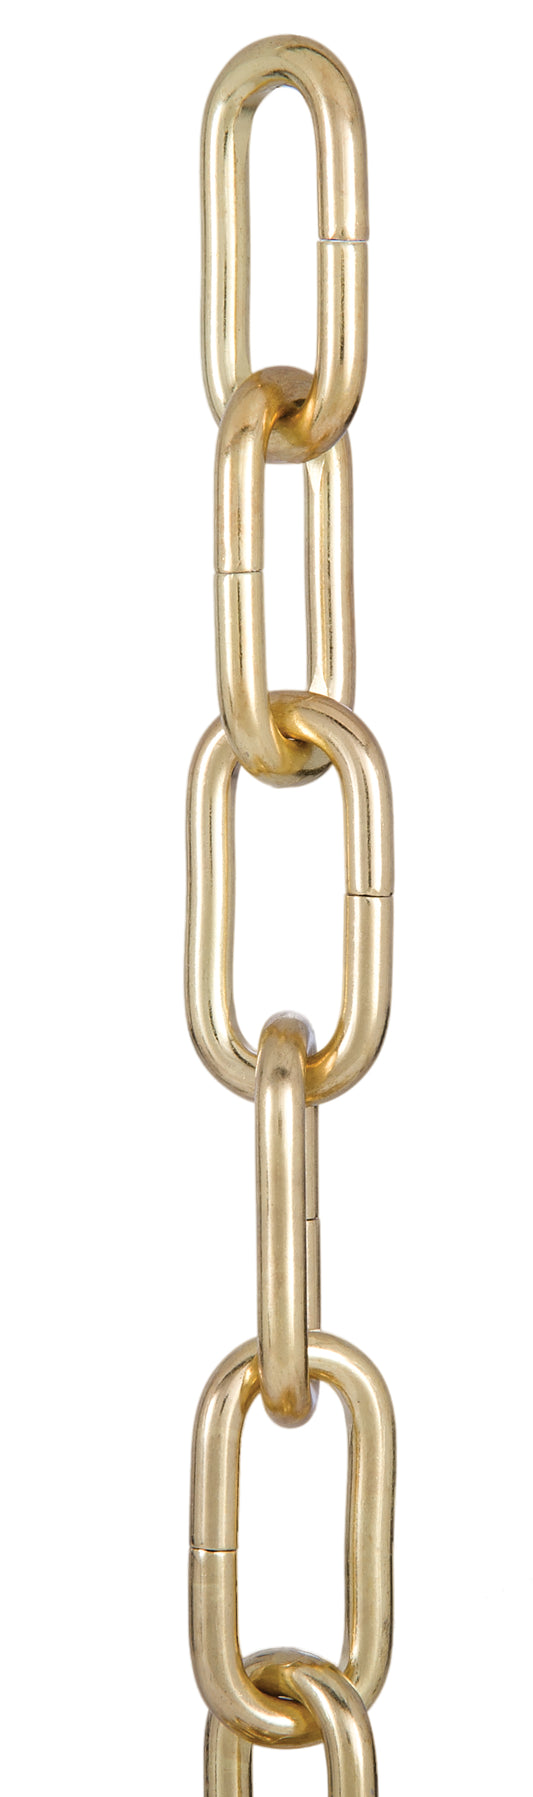 Brass Plated Steel, 0 Gauge Heavy Duty Chain for Larger Fixtures